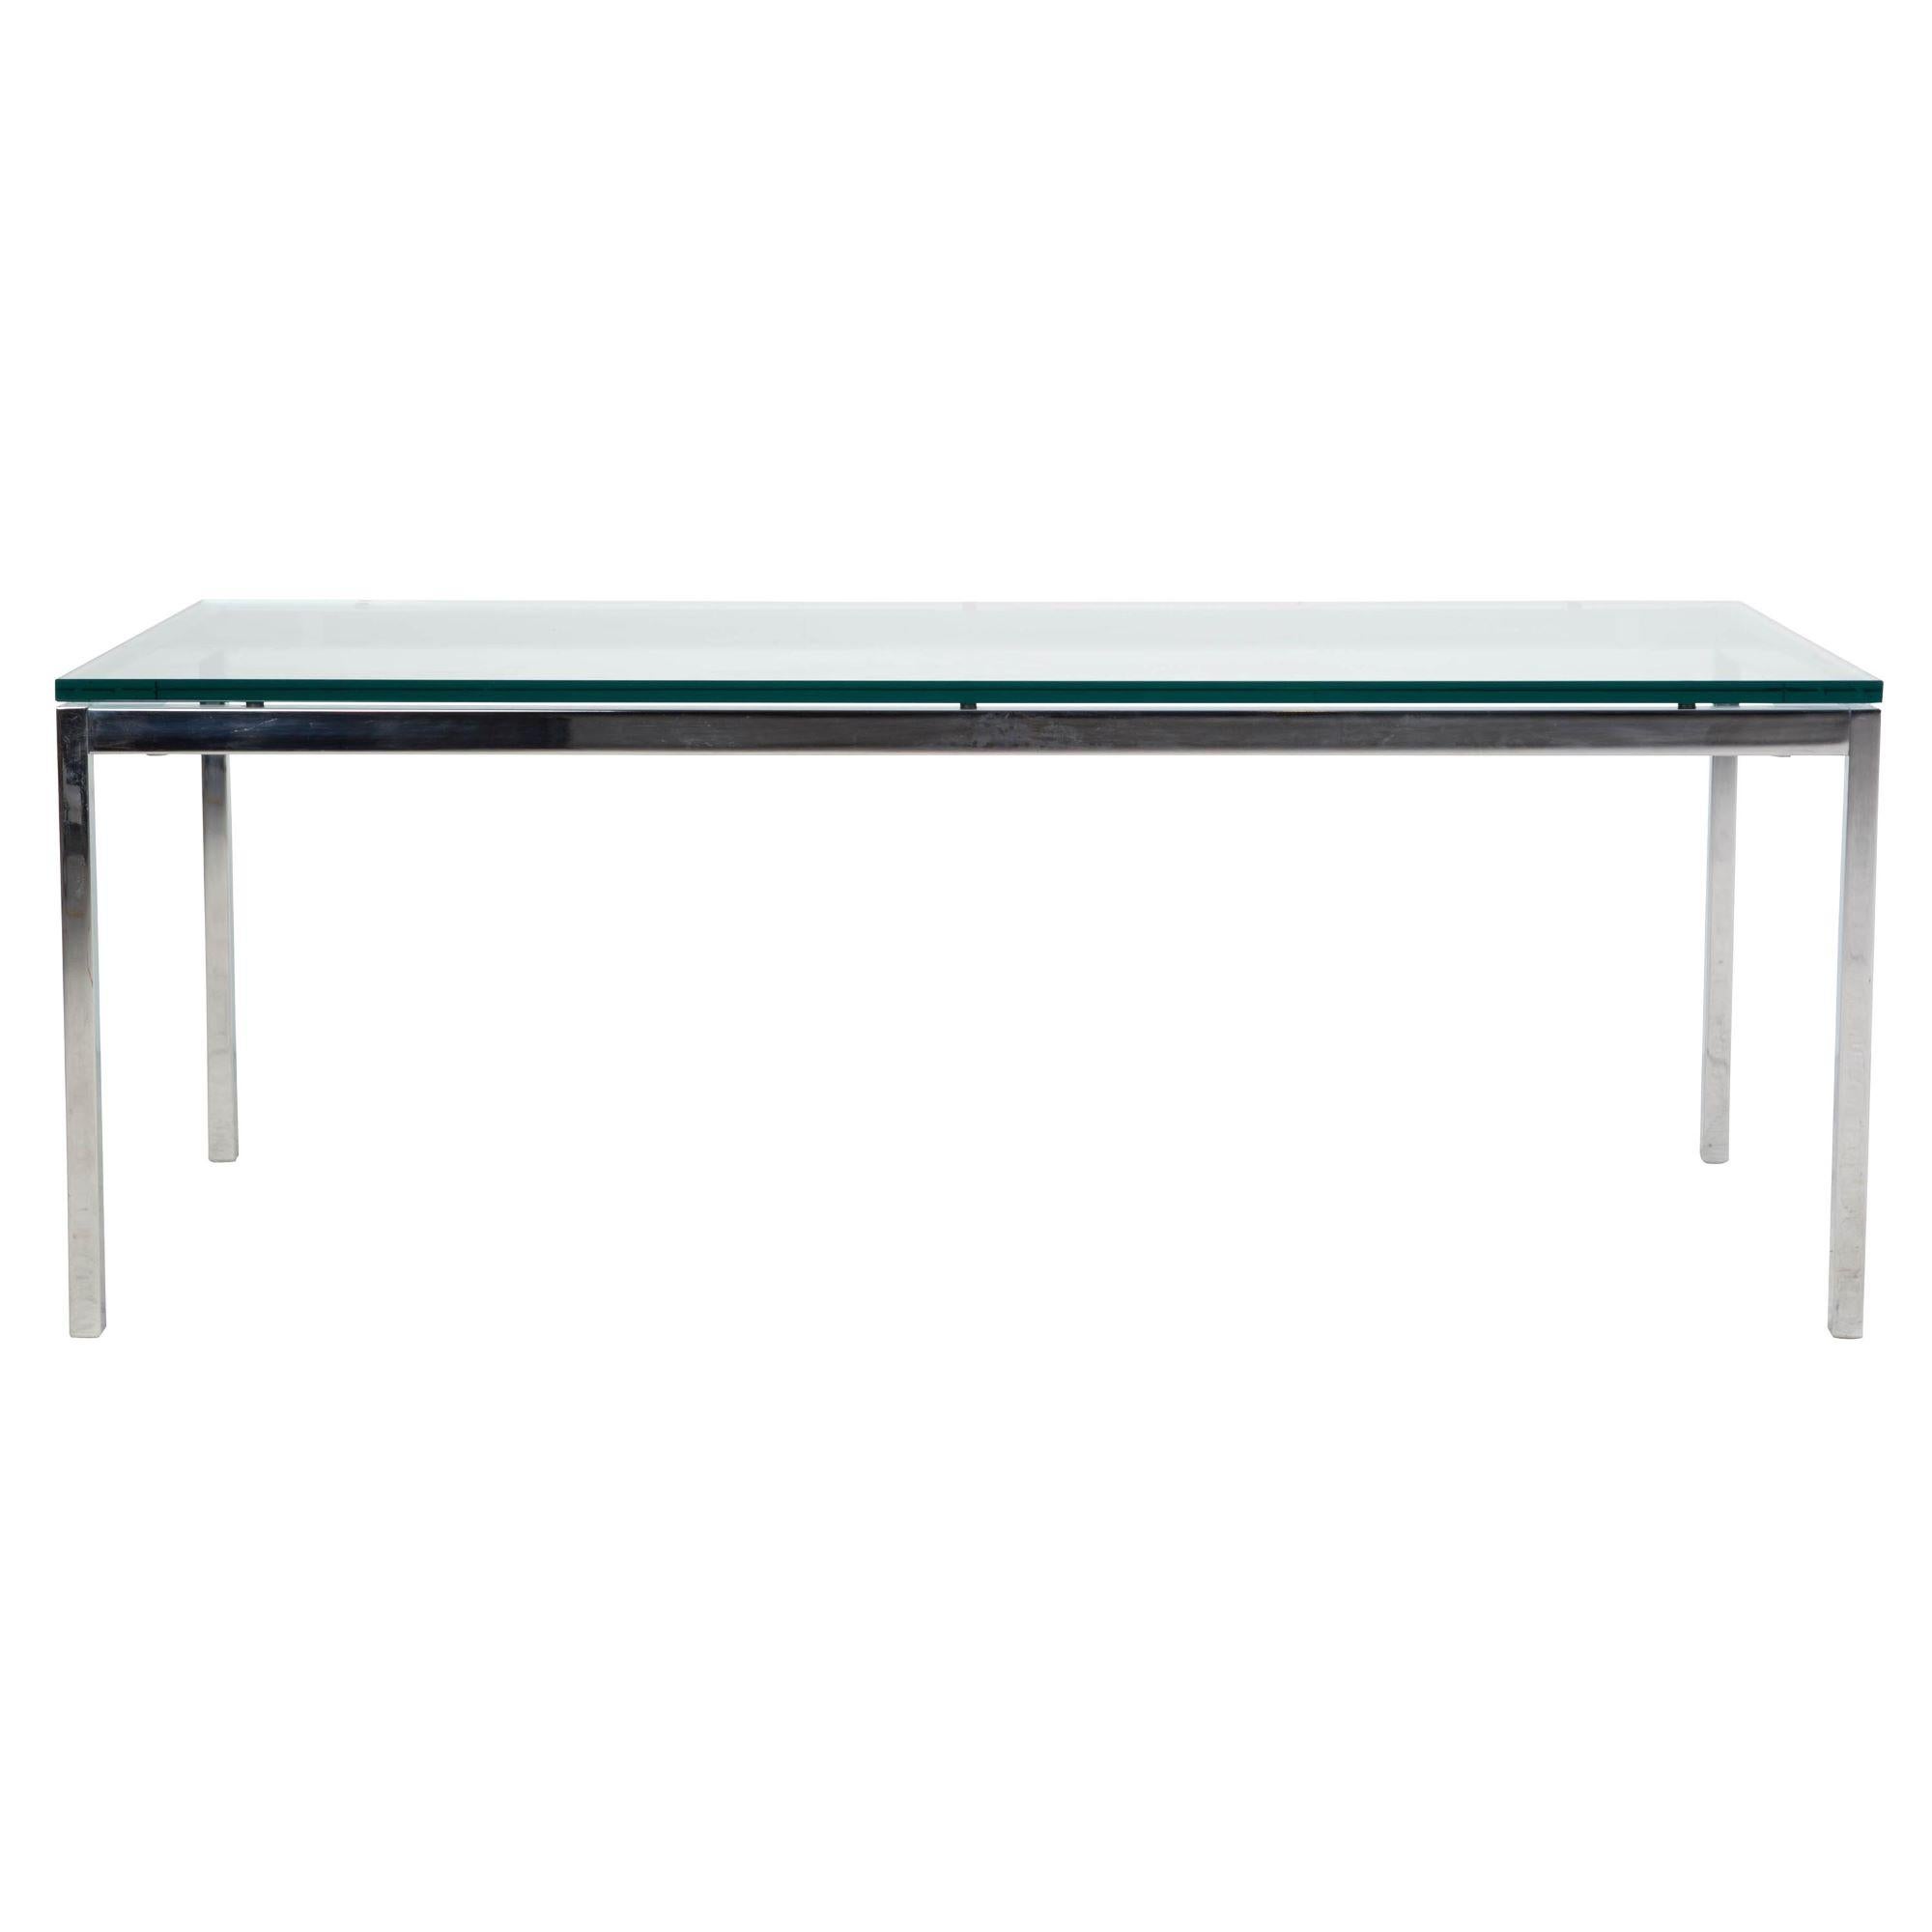 Contemporary chrome Florence Knoll coffee table by Knoll studio with glass top, signed at the base of the leg.